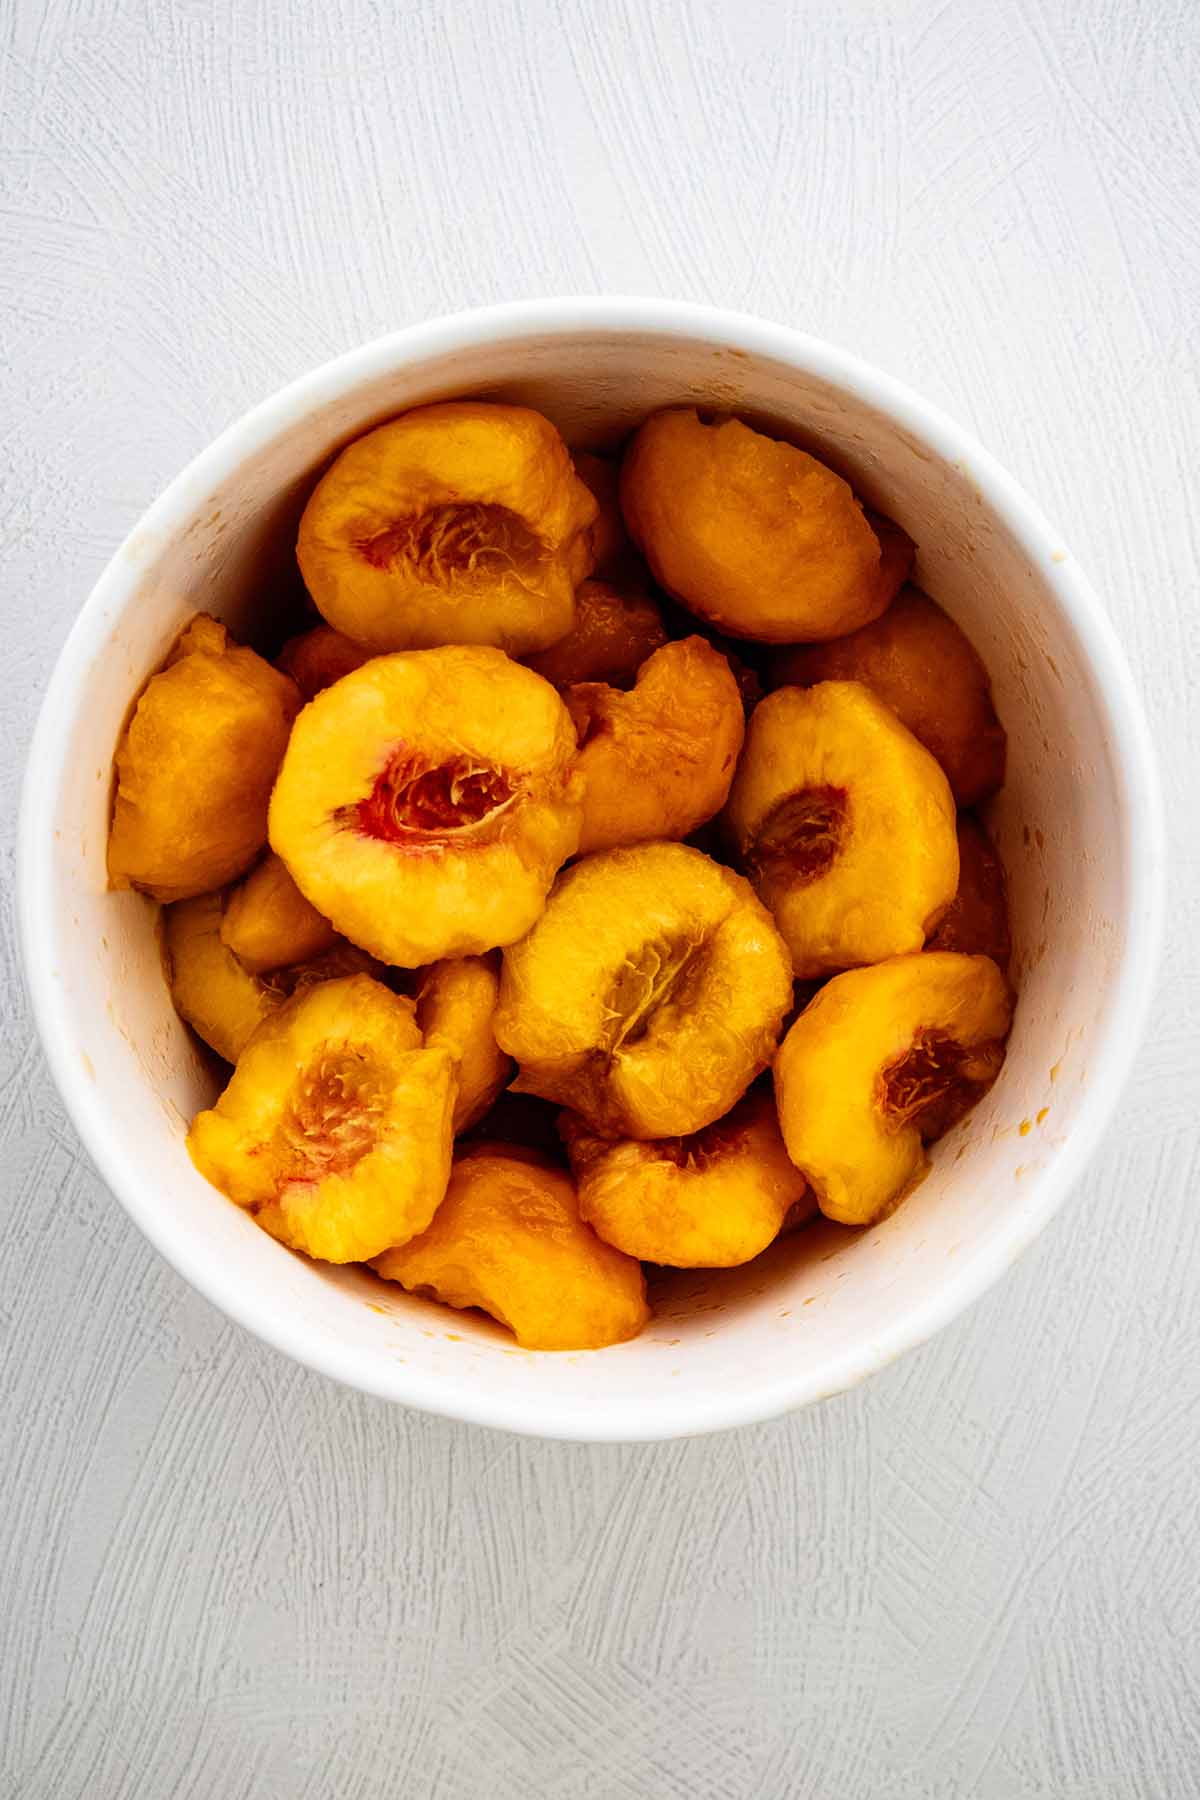 Peeled, pitted, and rough chopped peaches in a white ceramic bowl.